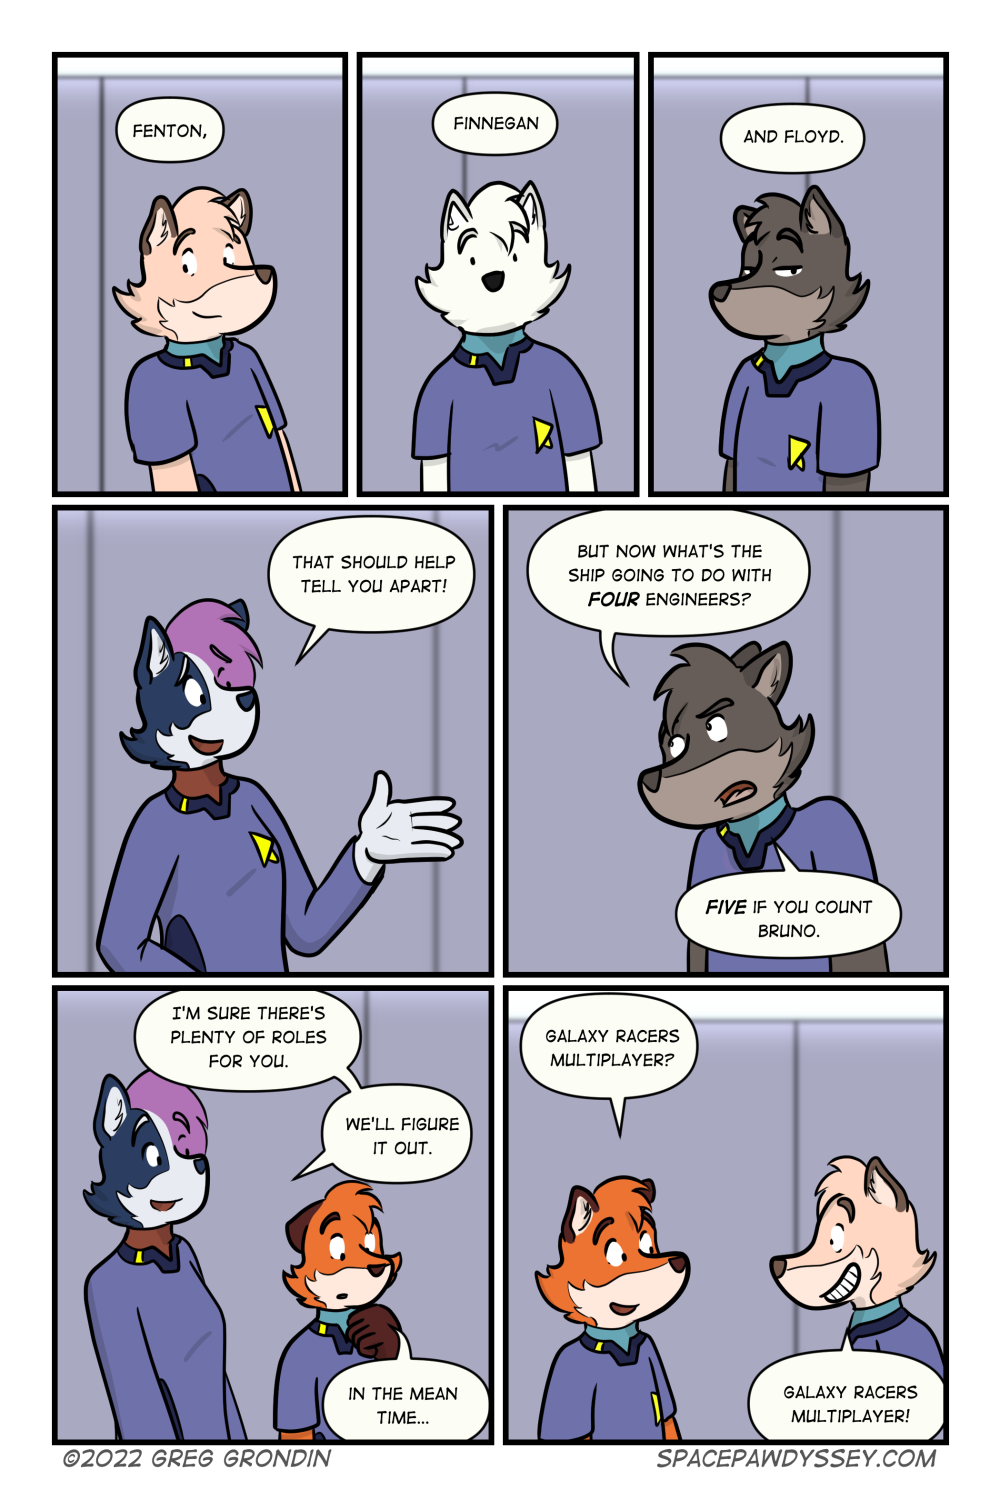 Space Pawdyssey #604